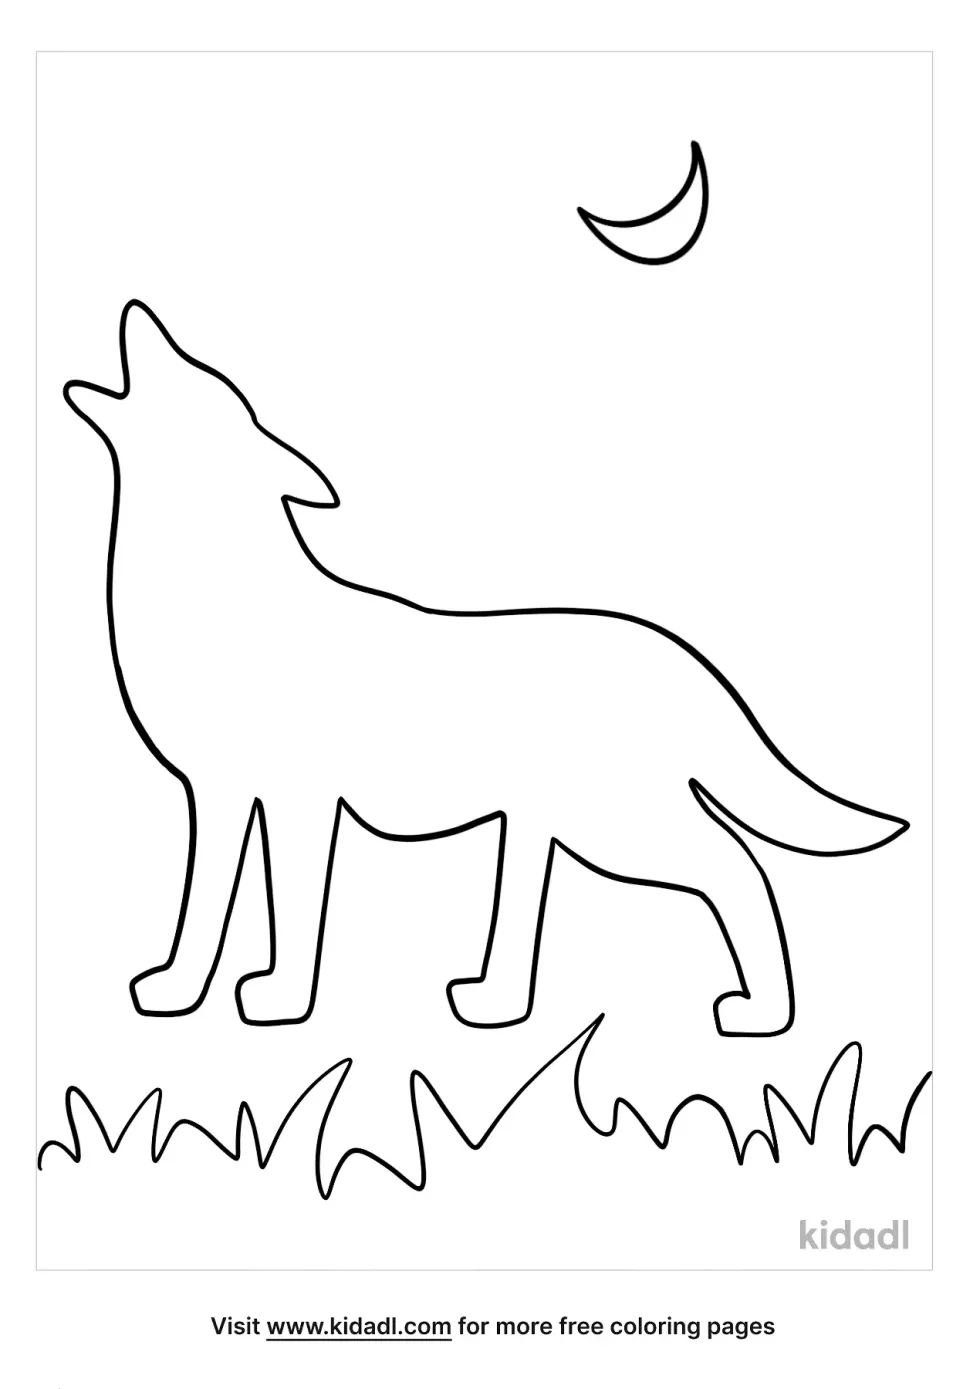 Coyote Outline